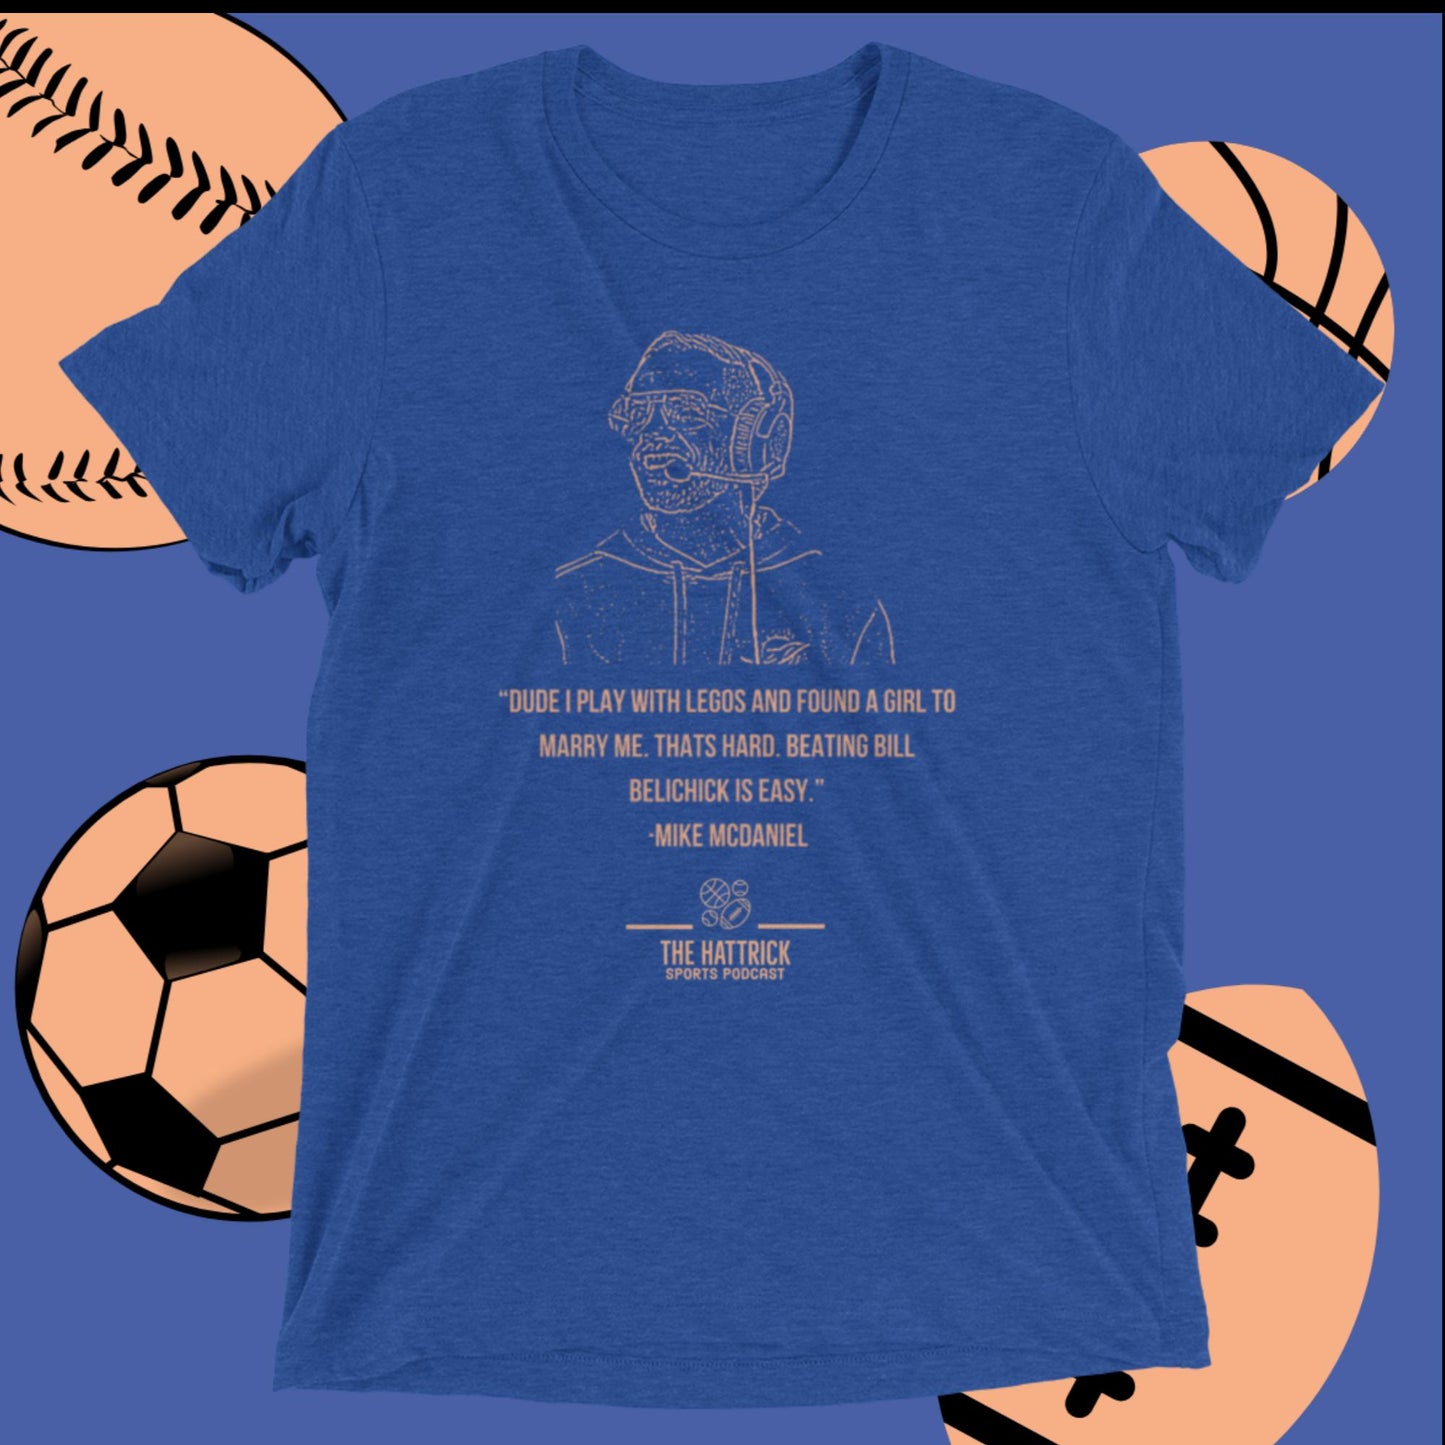 Mike McDaniel Quote│The HatTrick Sports Podcast Tee Shirt